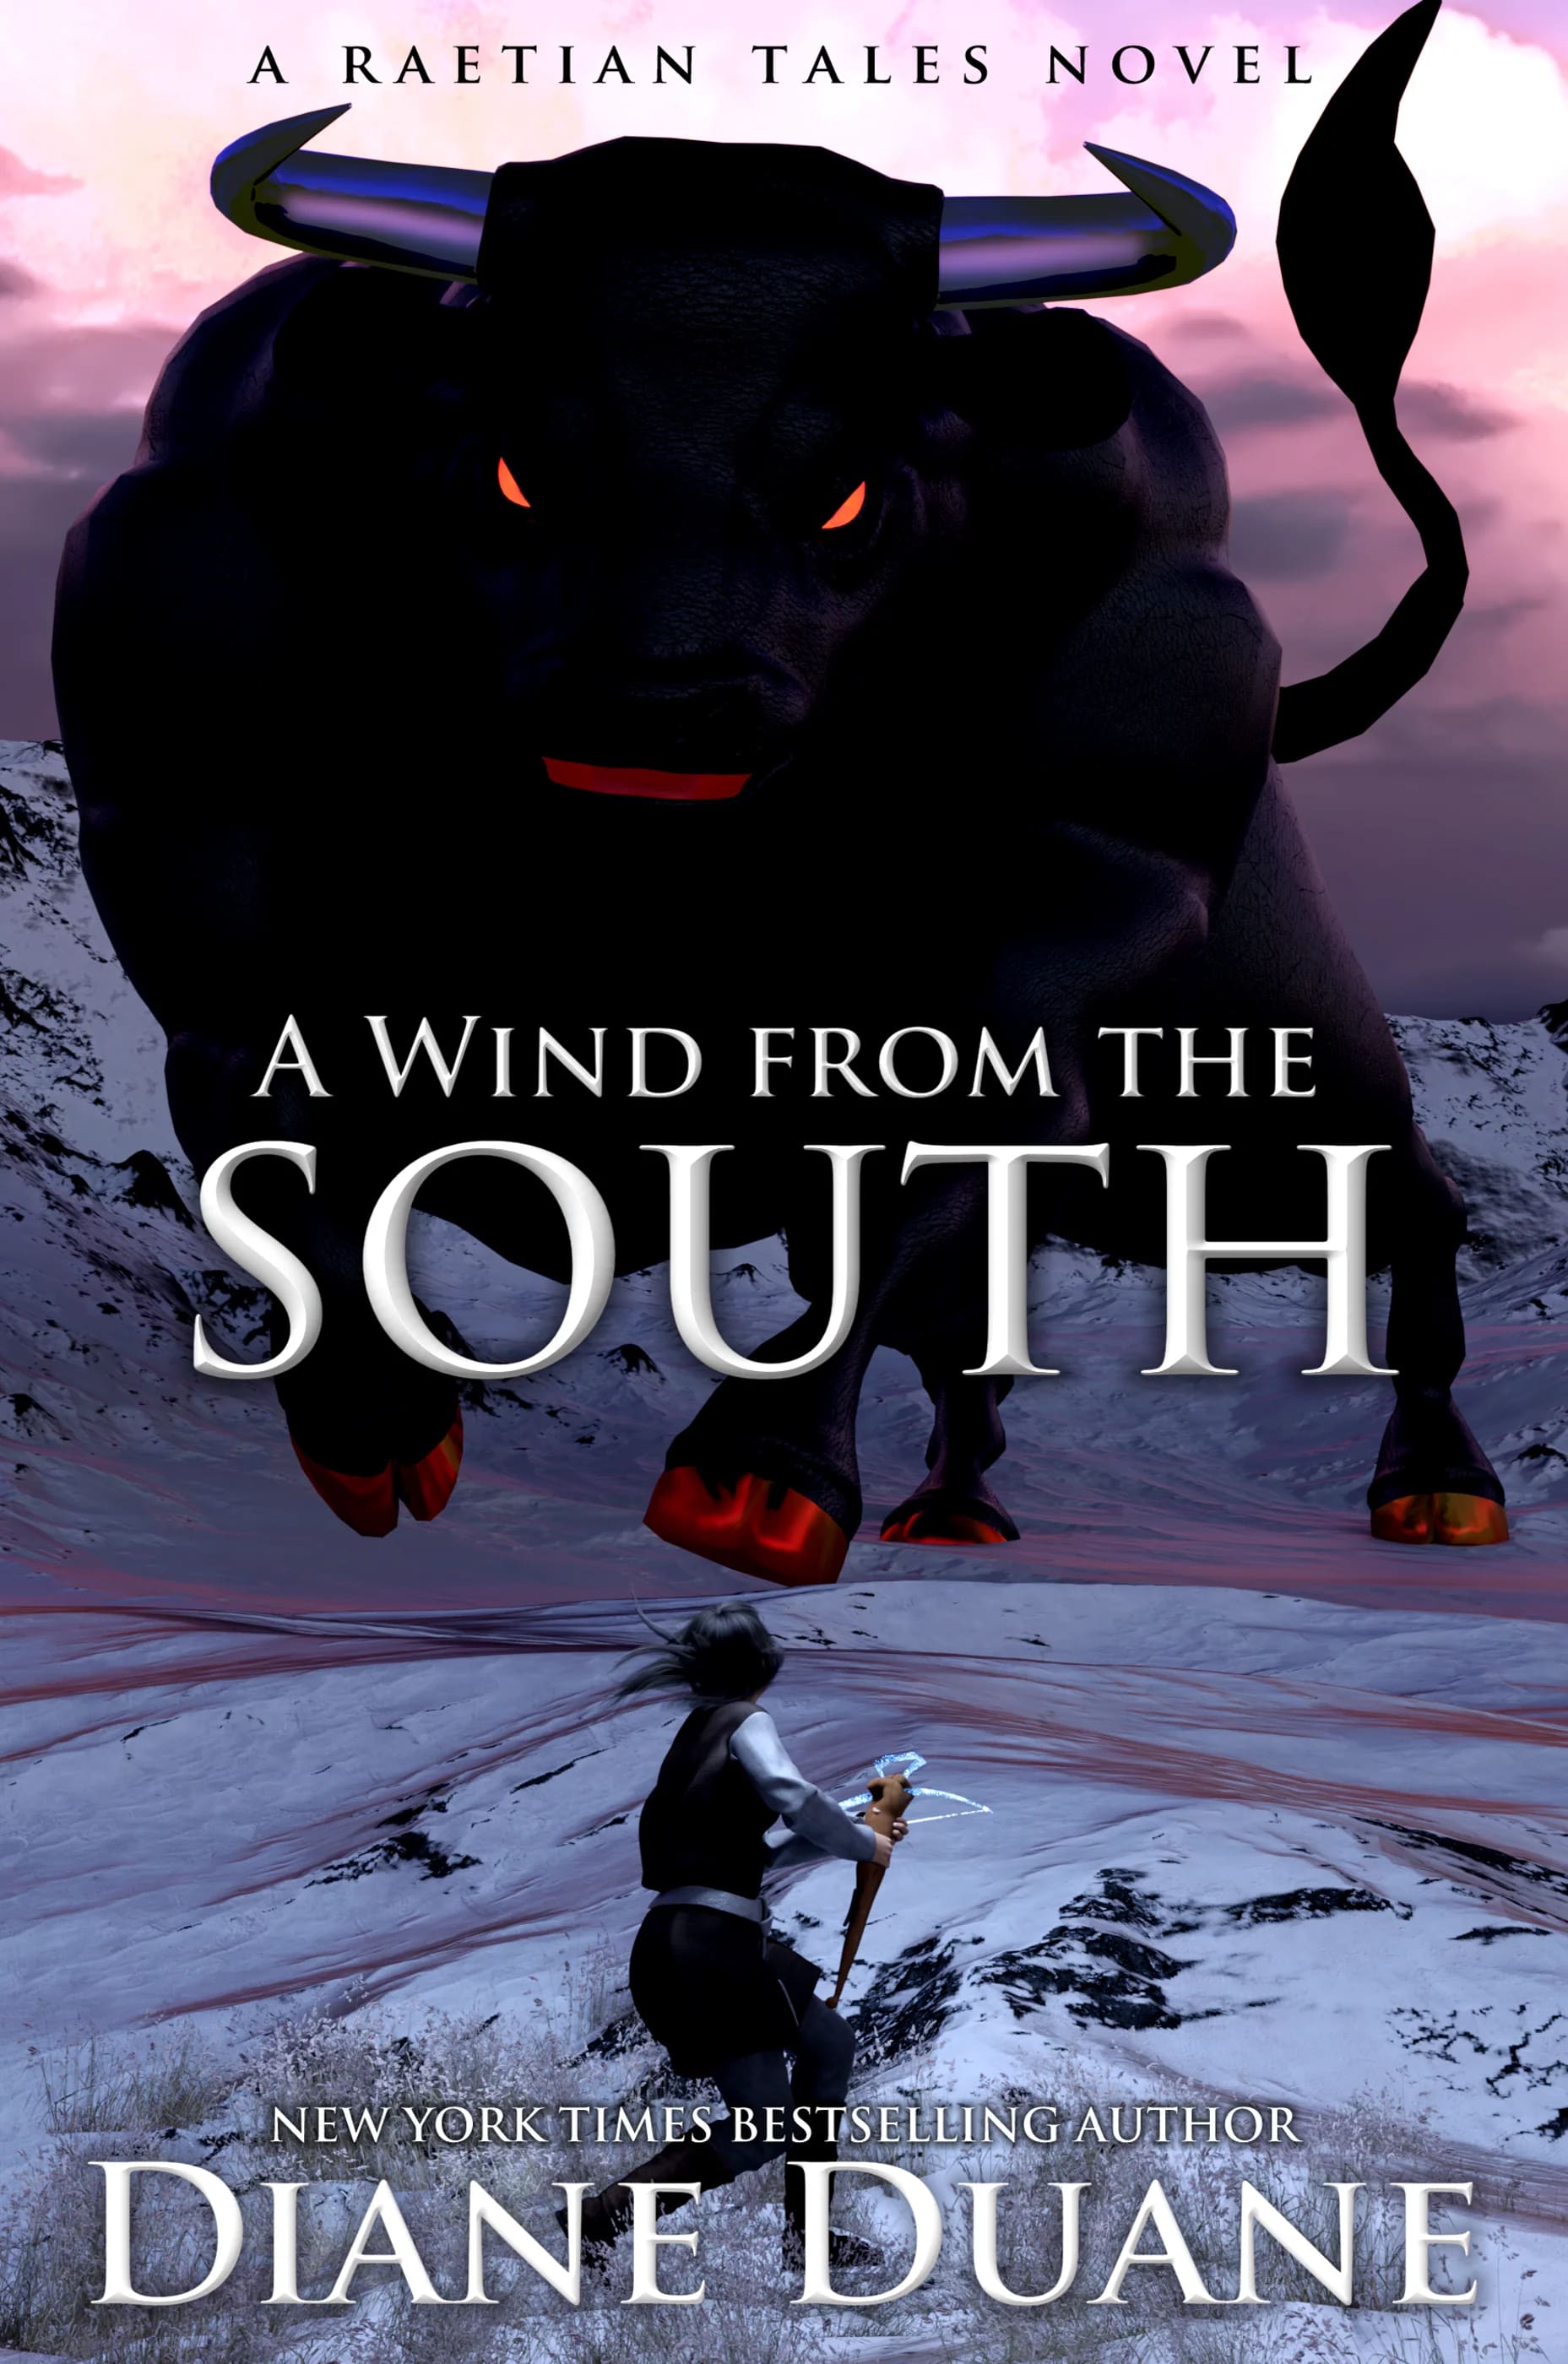 "Raetian Tales: A Wind from the South" cover